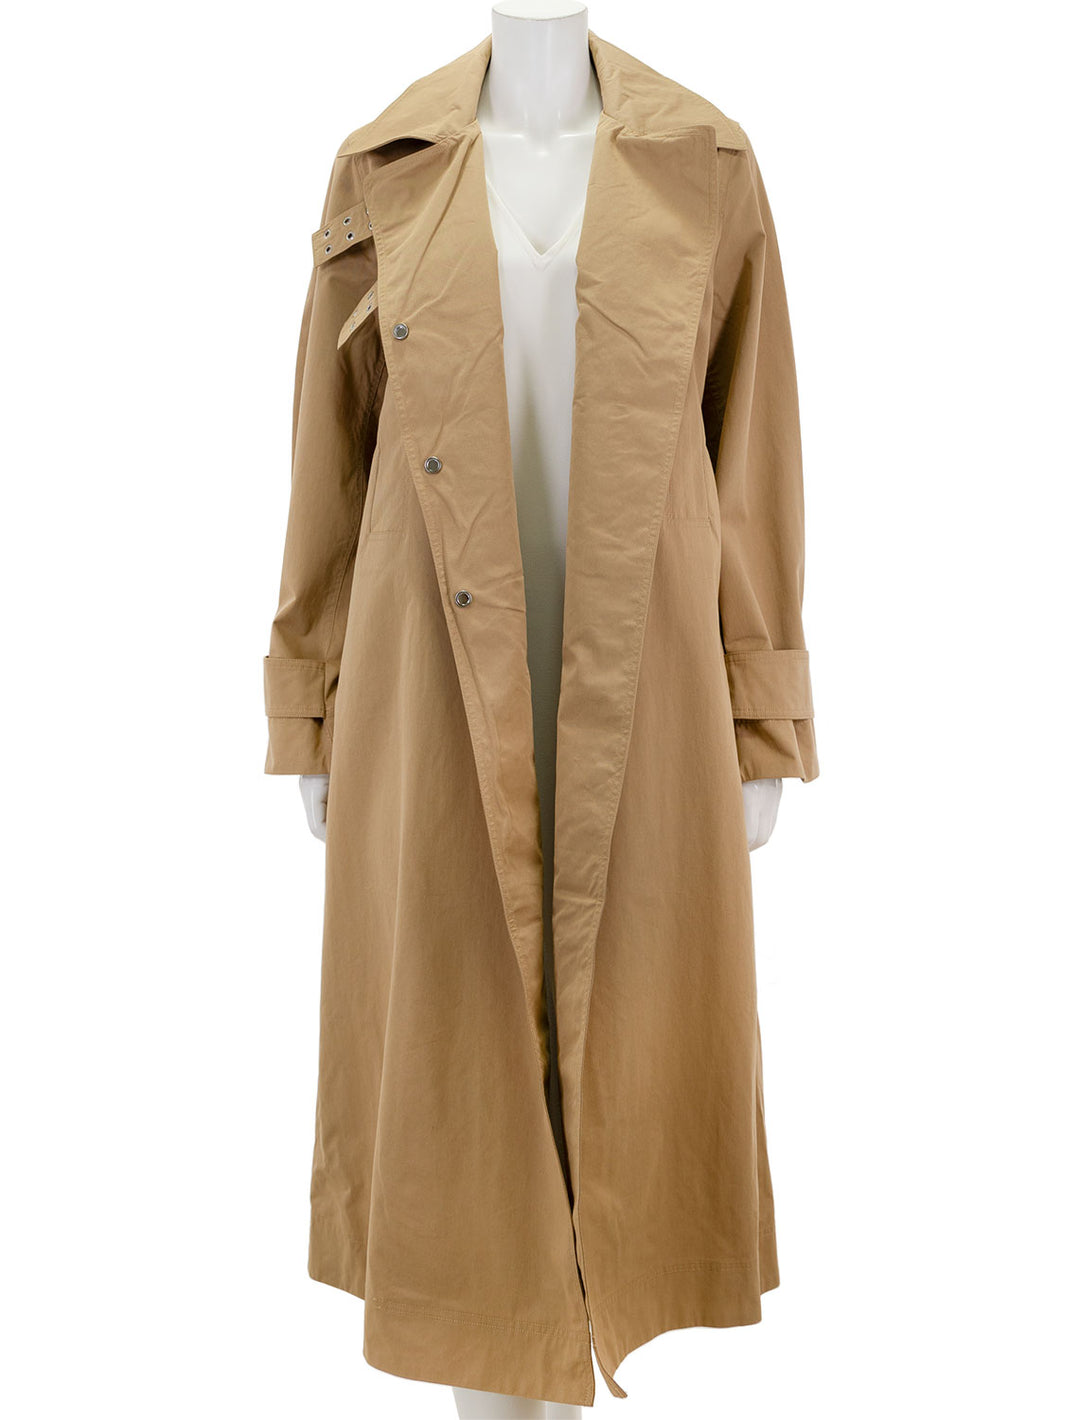 Front view of GANNI's cotton twill coat in tigers eye, unbuttoned.